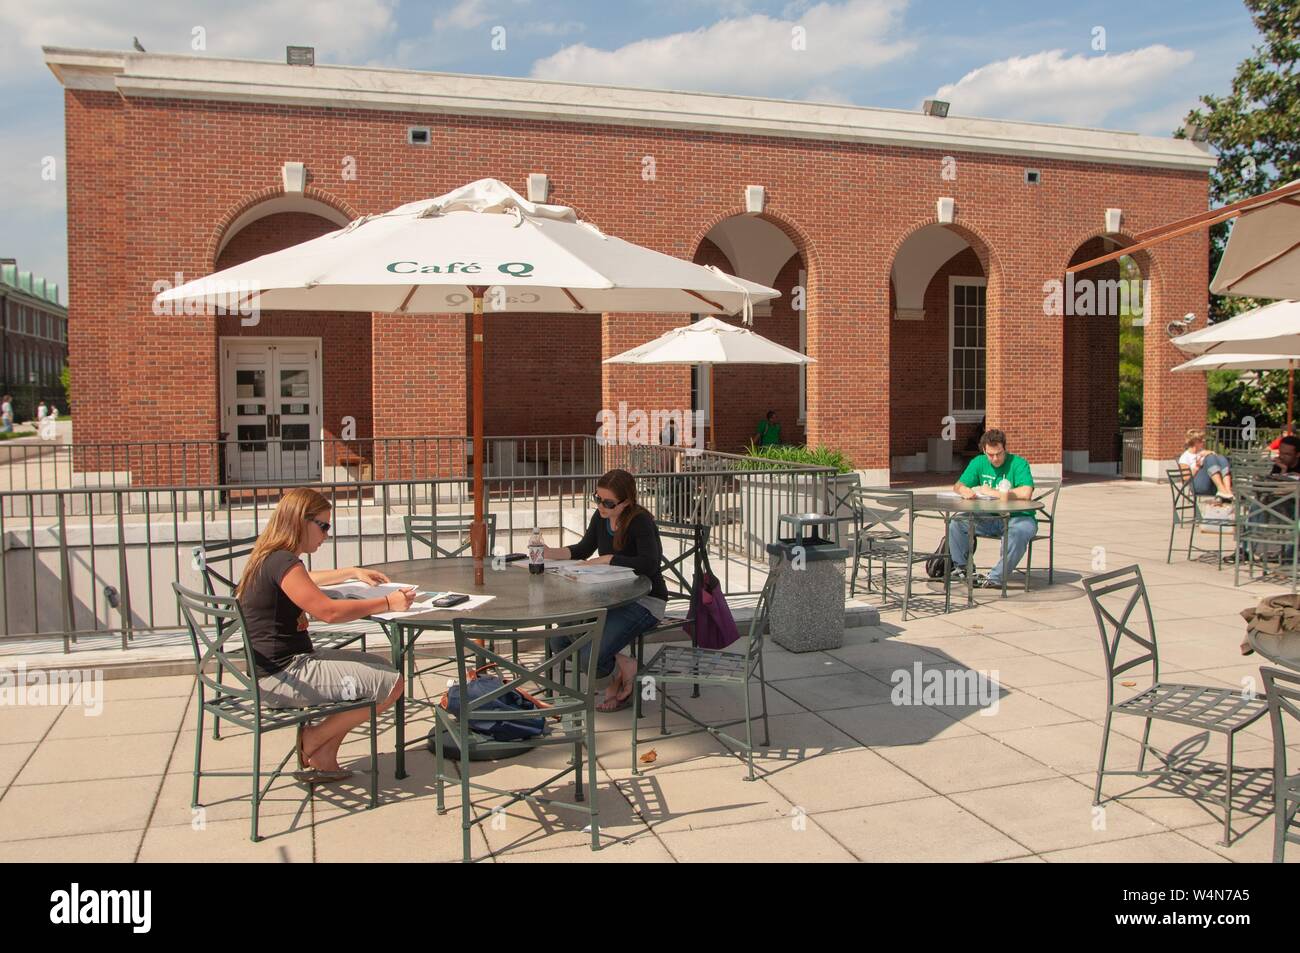 People dine outdoors at Cafe Q at the Milton S Eisenhower Library on the Homewood Campus of the Johns Hopkins University in Baltimore, Maryland, April 25, 2006. From the Homewood Photography collection. () Stock Photo